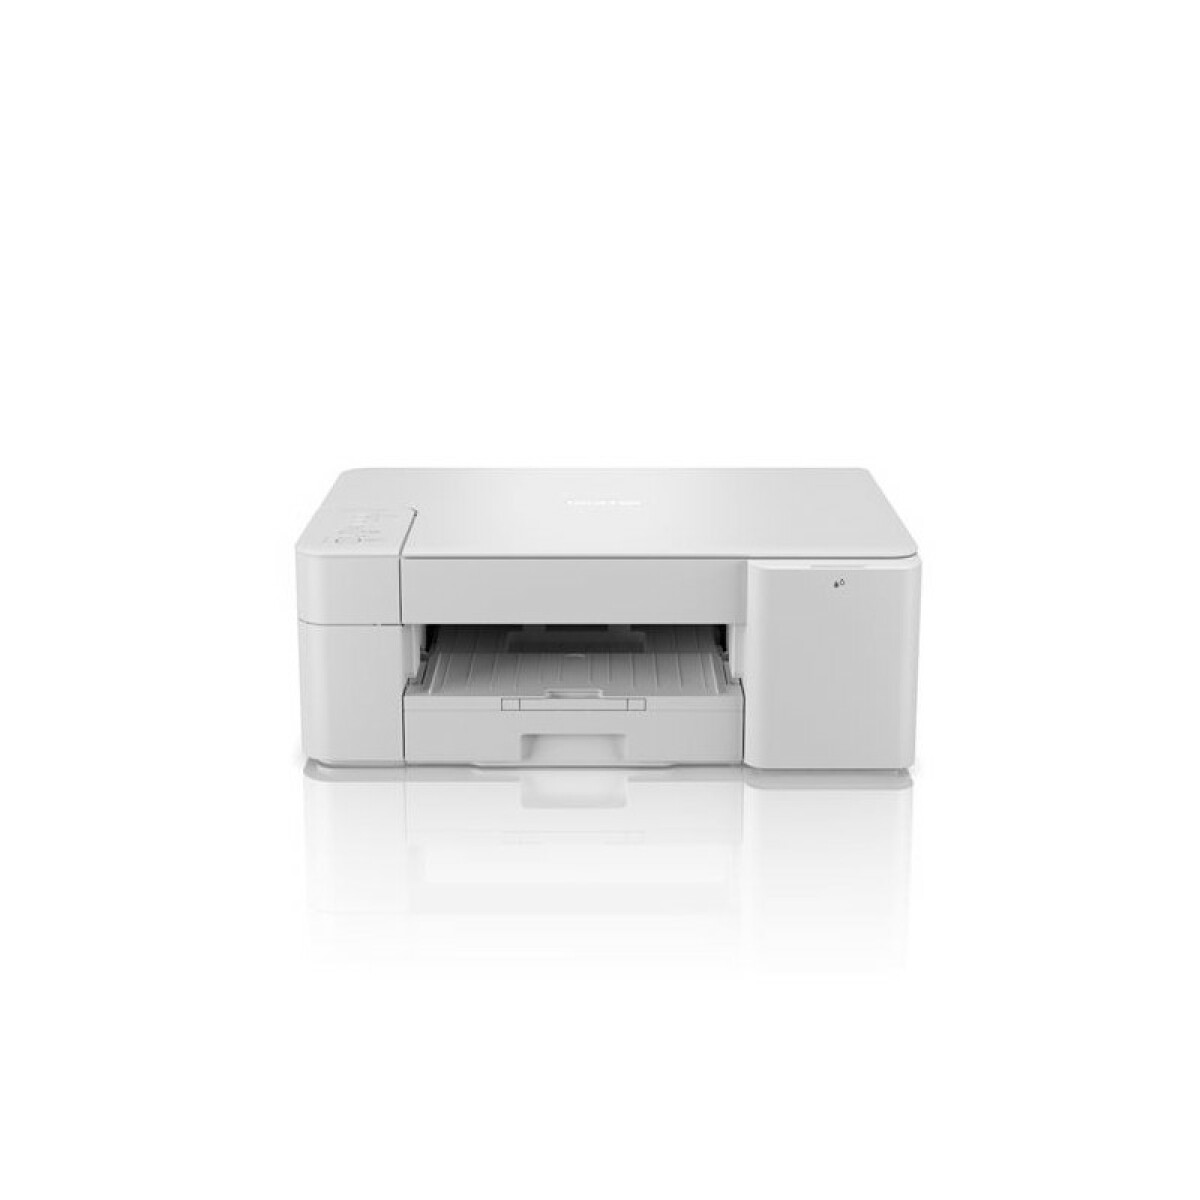 Imprimante multifonction Brother DCP J1200W Blanc